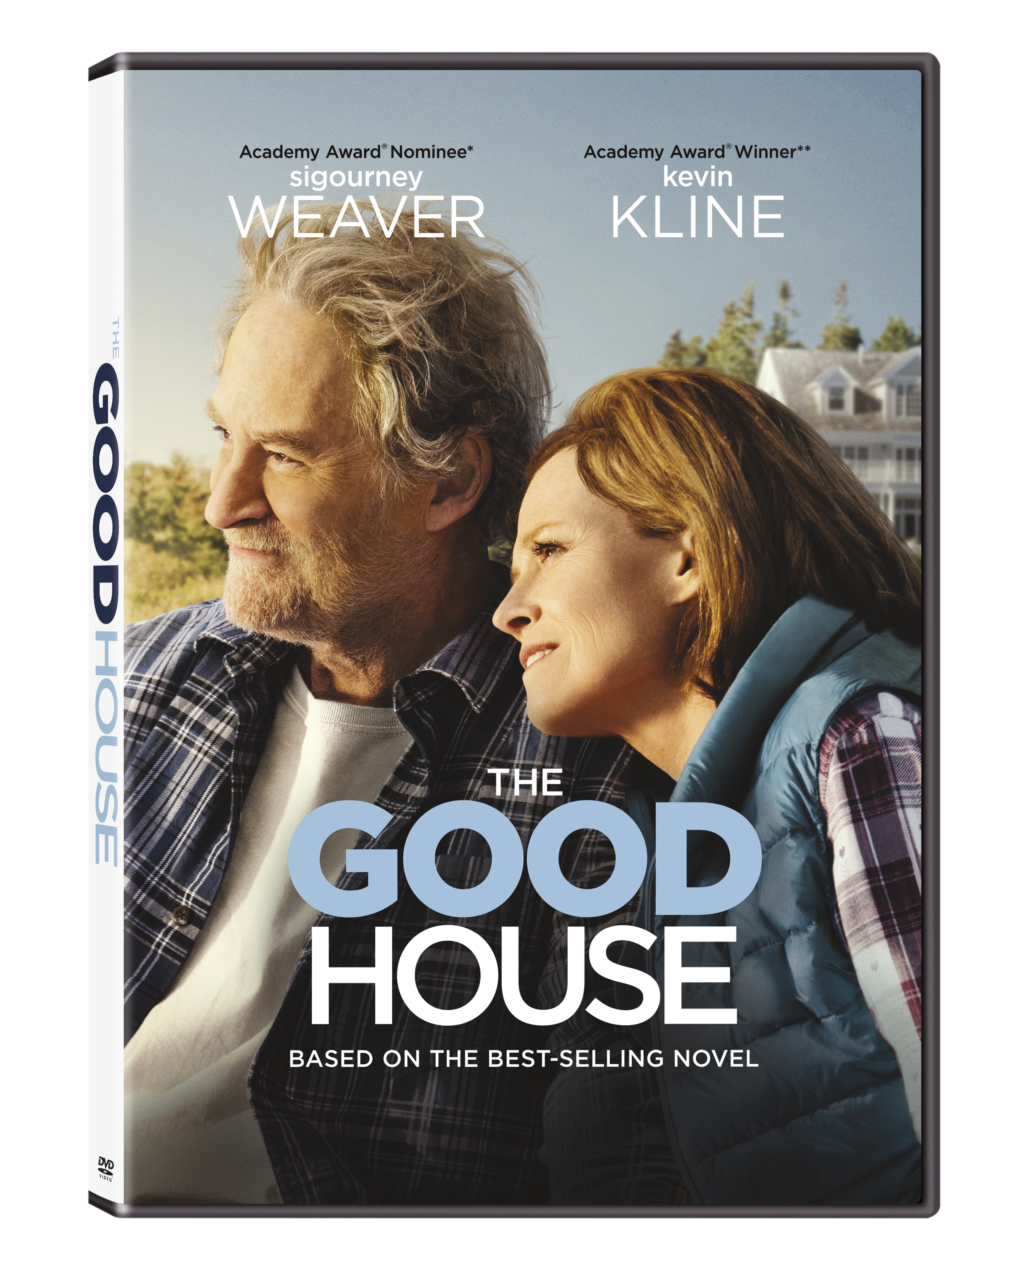 The Good House DVD cover (Lionsgate)